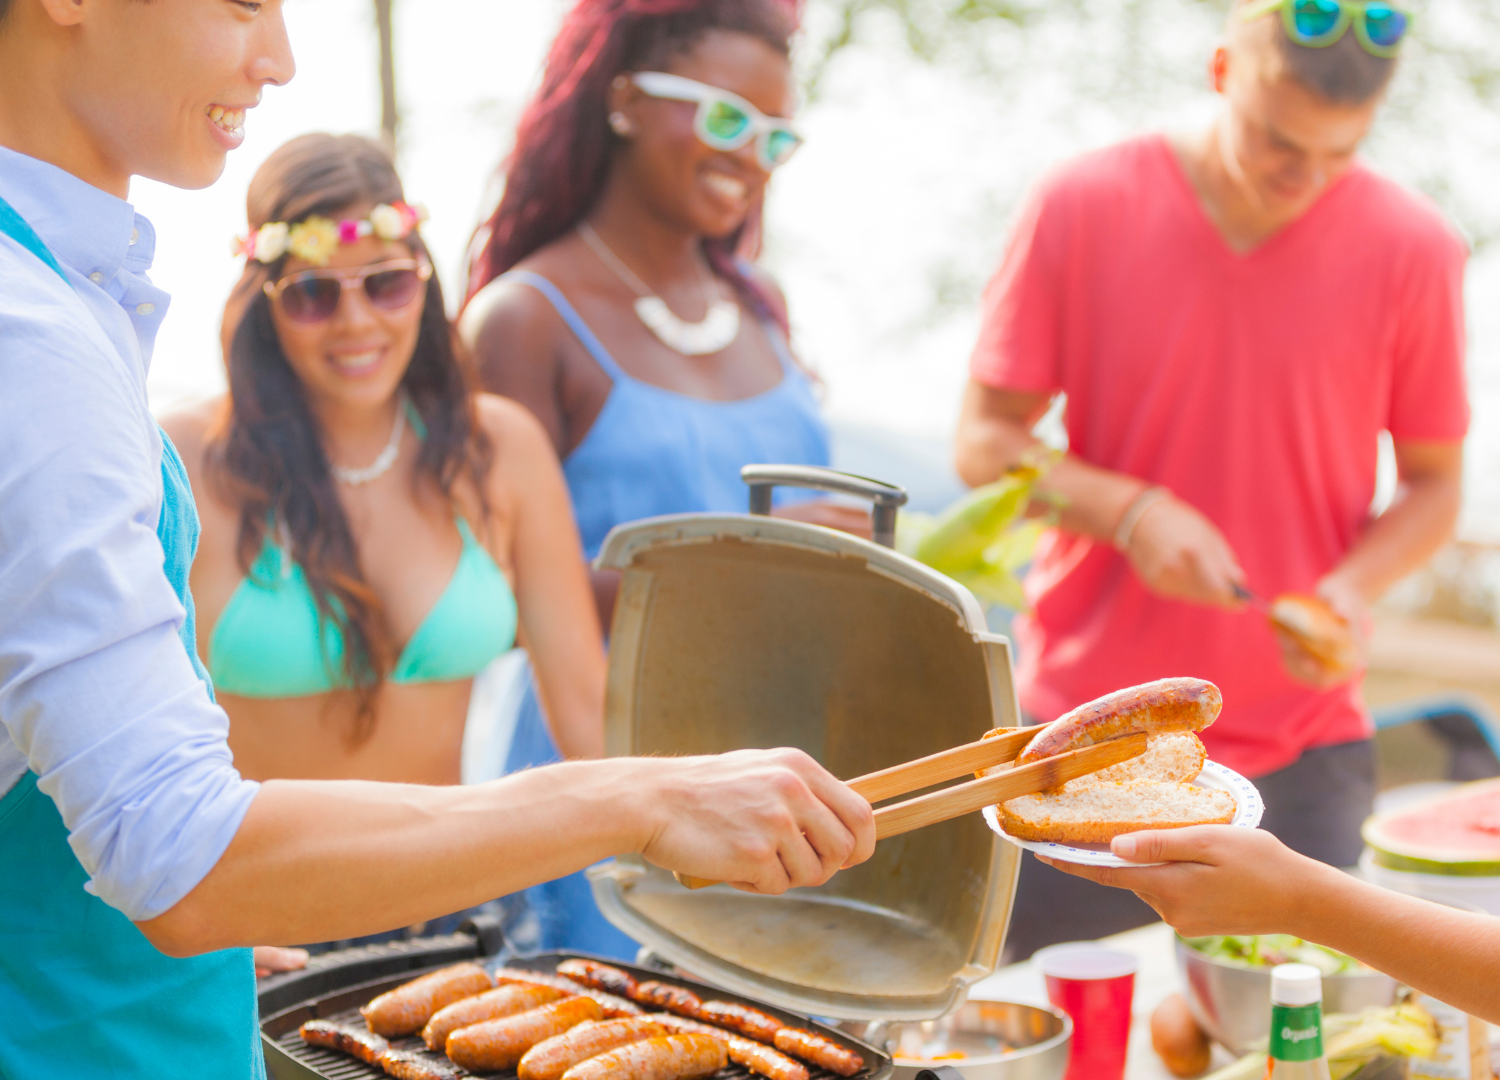 , BBQ Season Is Here! Tips On How to Stay Pest-Free